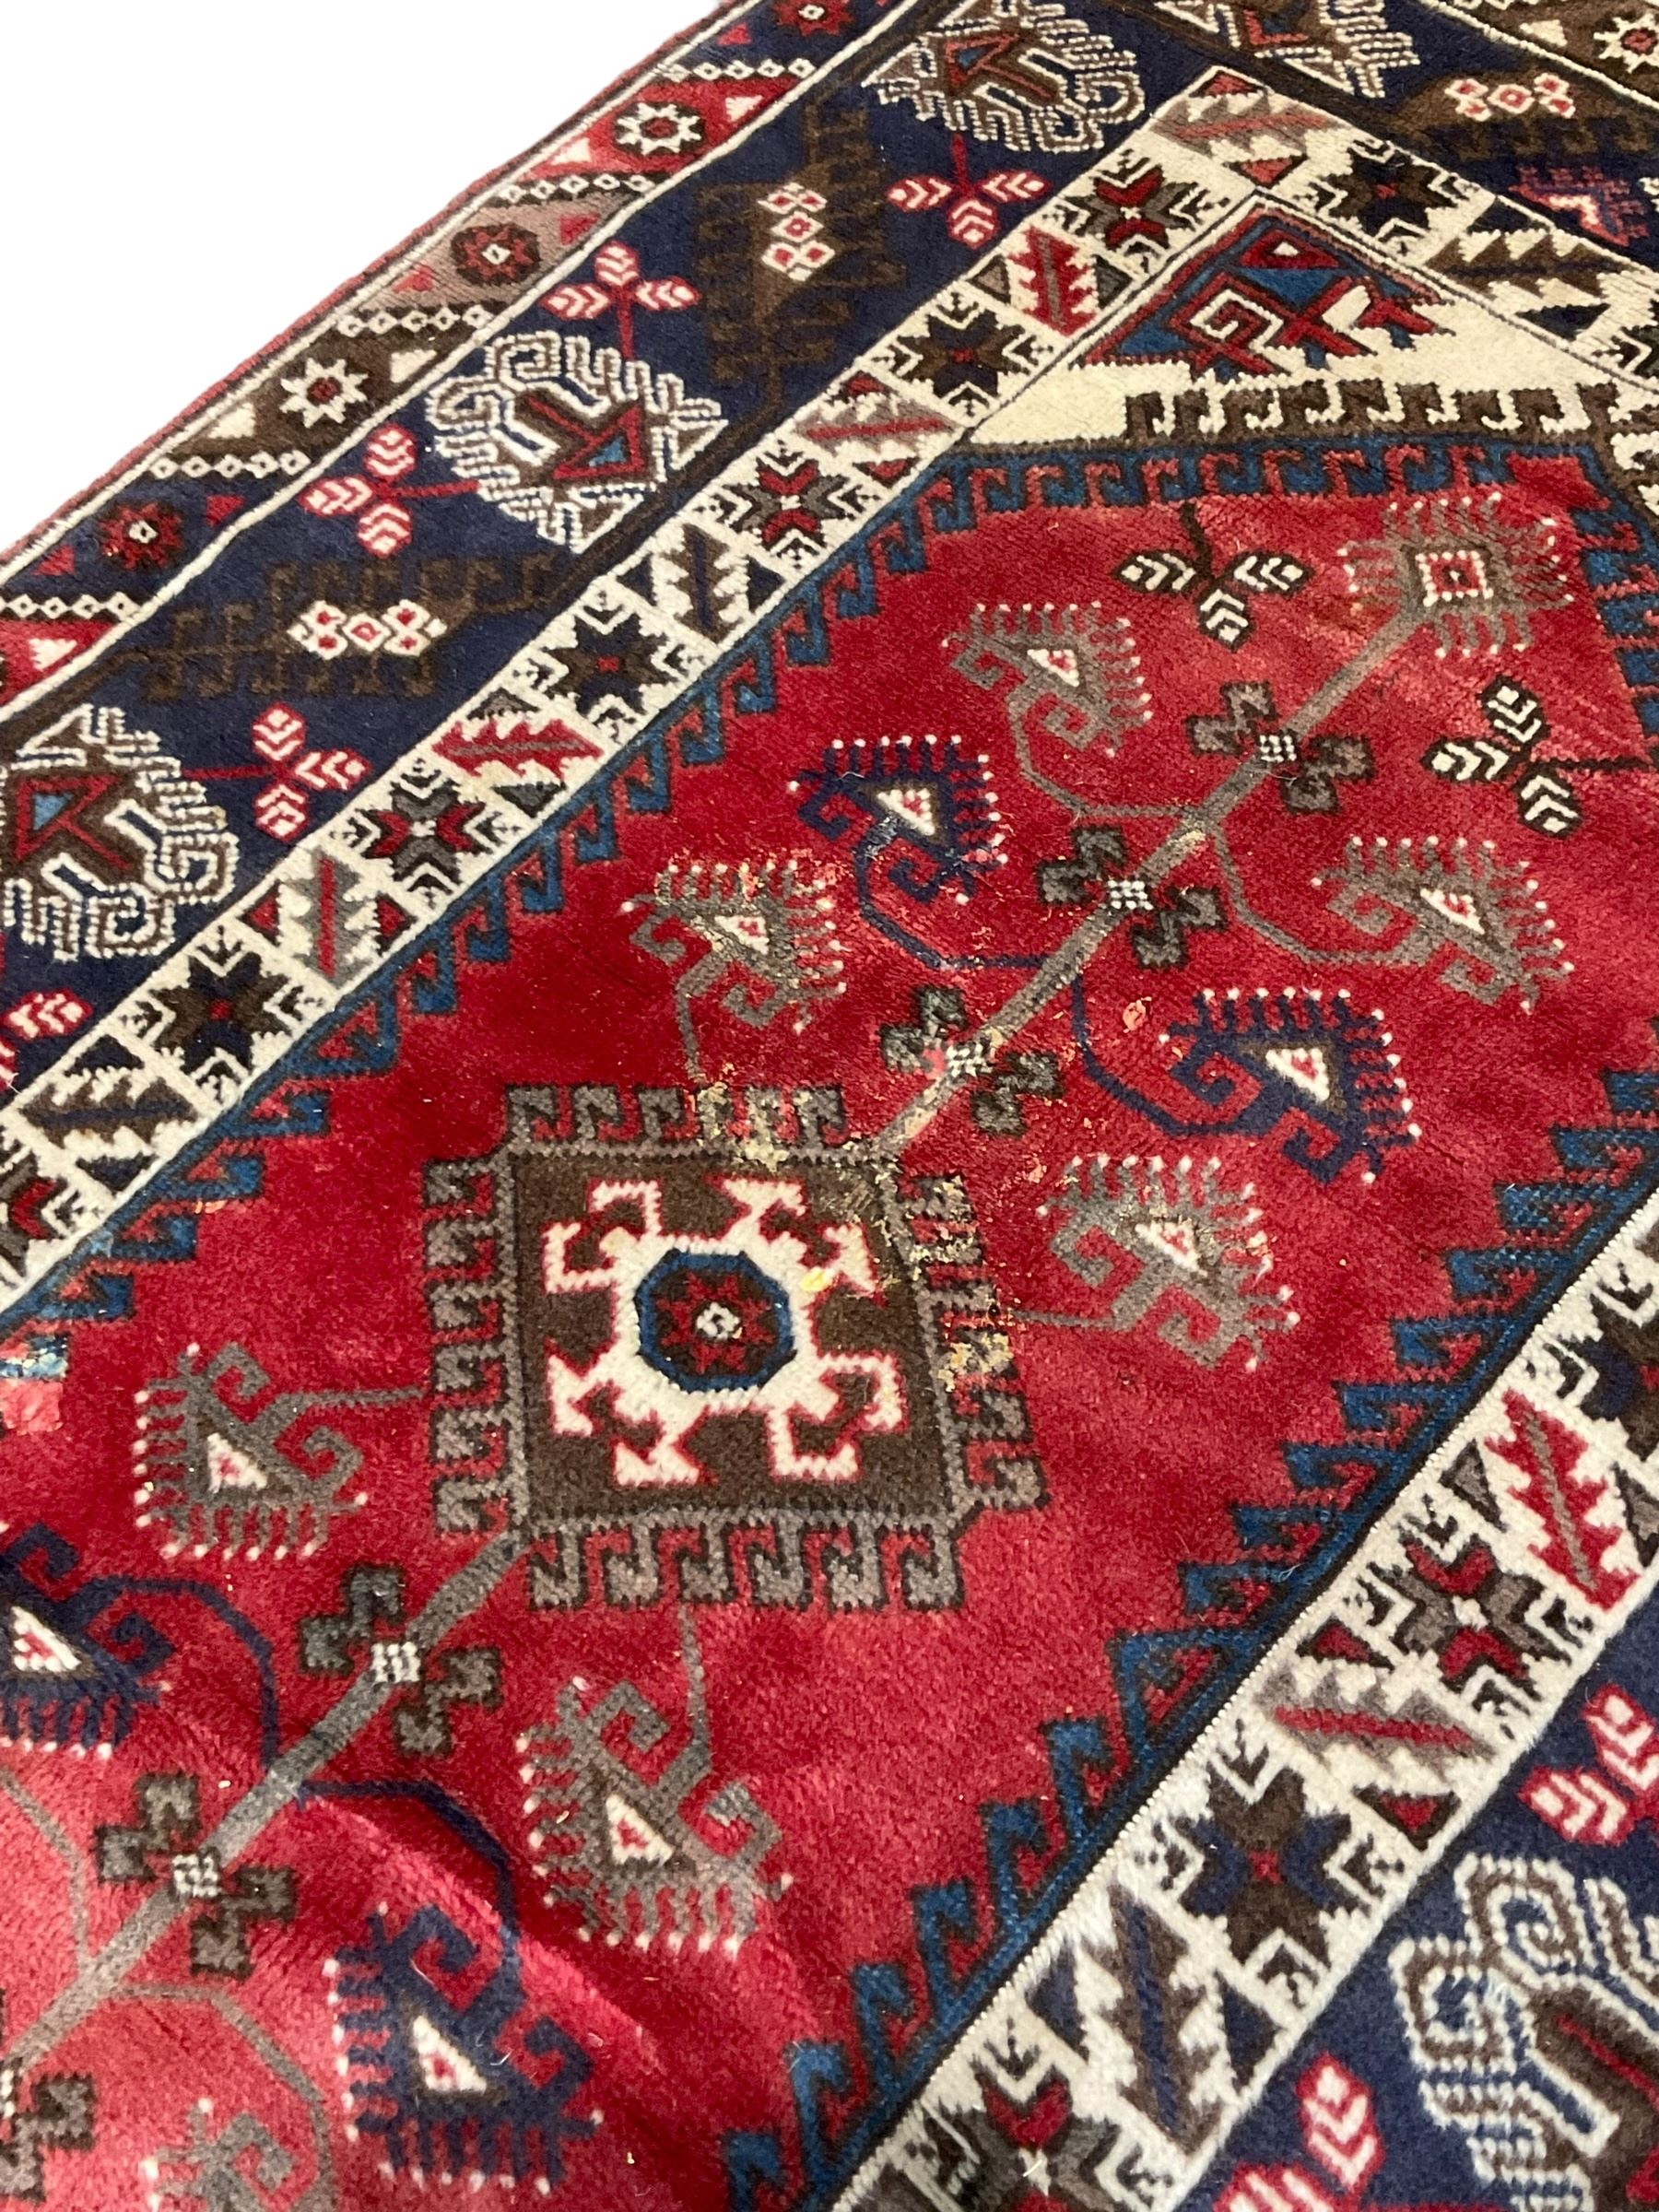 Turkish Dosemealti ivory blue and red ground rug - Image 6 of 7